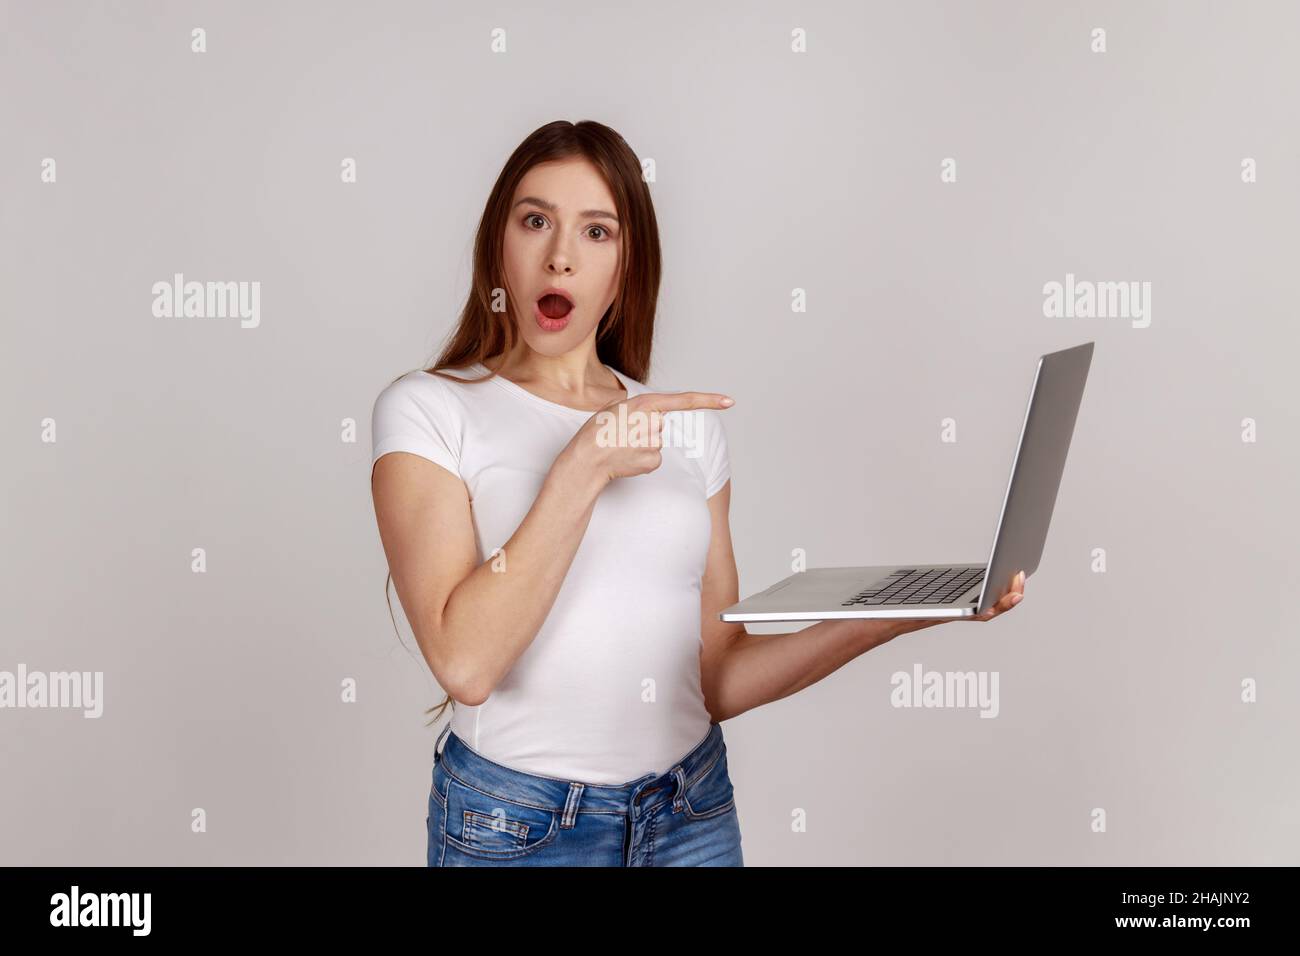 Portrait of amazed emotional woman pointing laptop screen and looking at camera with shocked expression, open mouth, wearing white T-shirt. Indoor studio shot isolated on gray background. Stock Photo